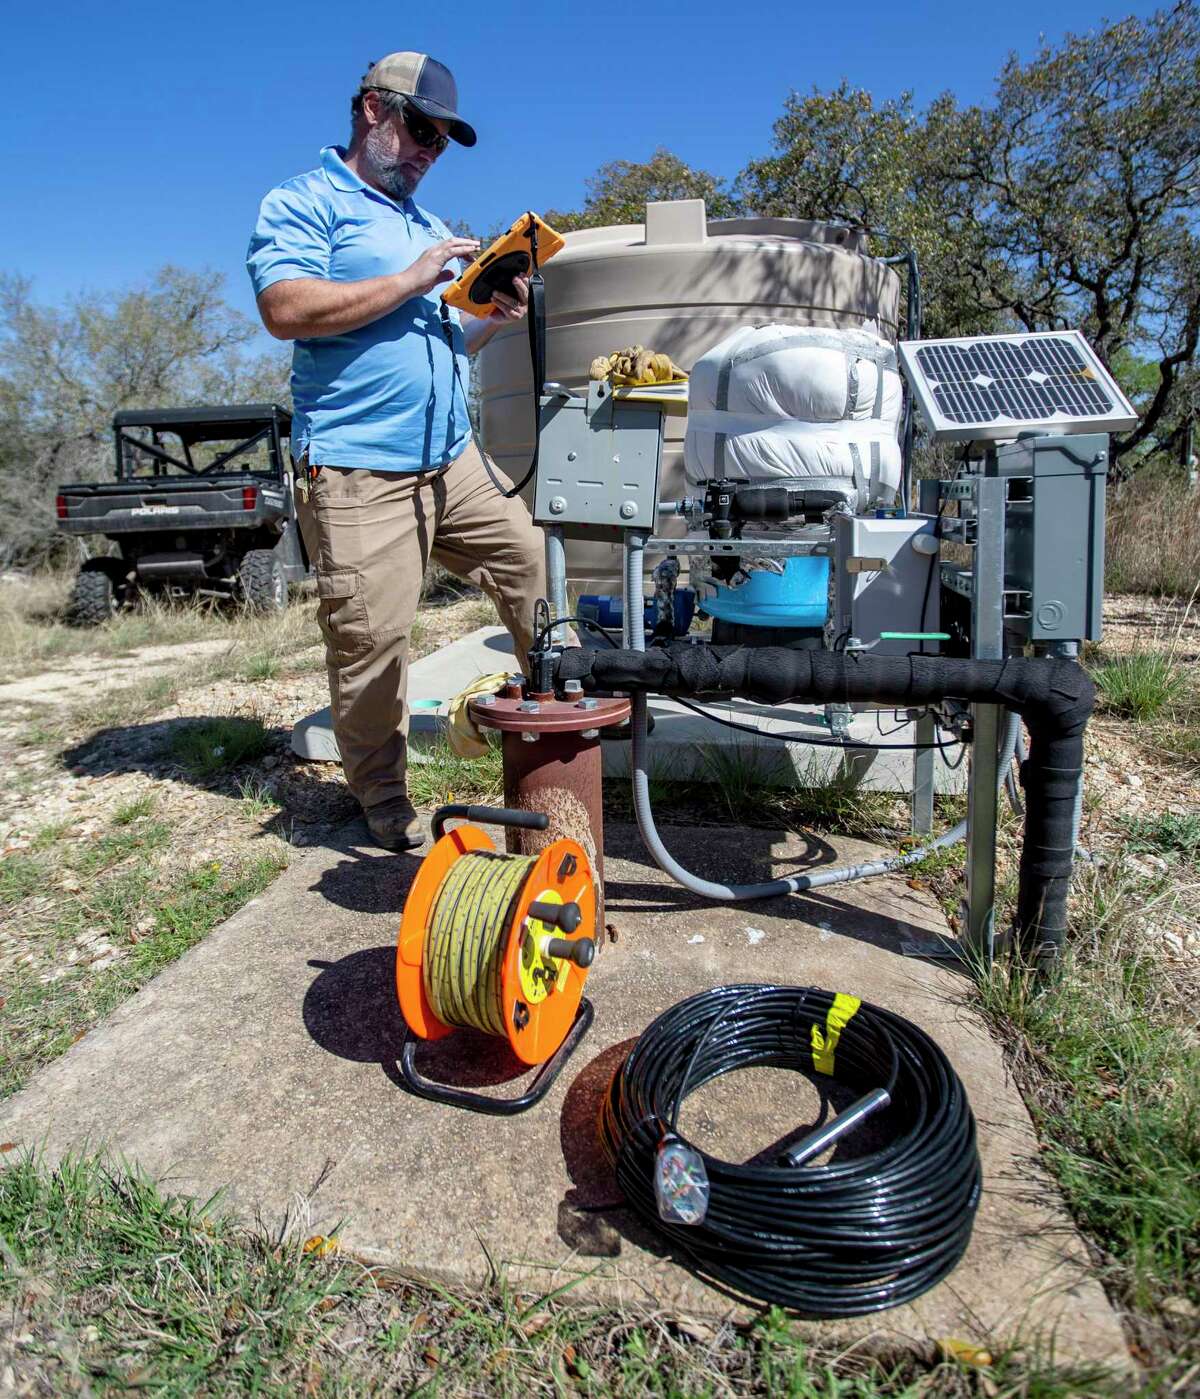 Charles Crawford, data collection supervisor at the Edwards Aquifer Authority, prepares on Wednesday, March 30, 2022, to measure the water level of well at the authority’s Field Research Park in far north San Antonio.